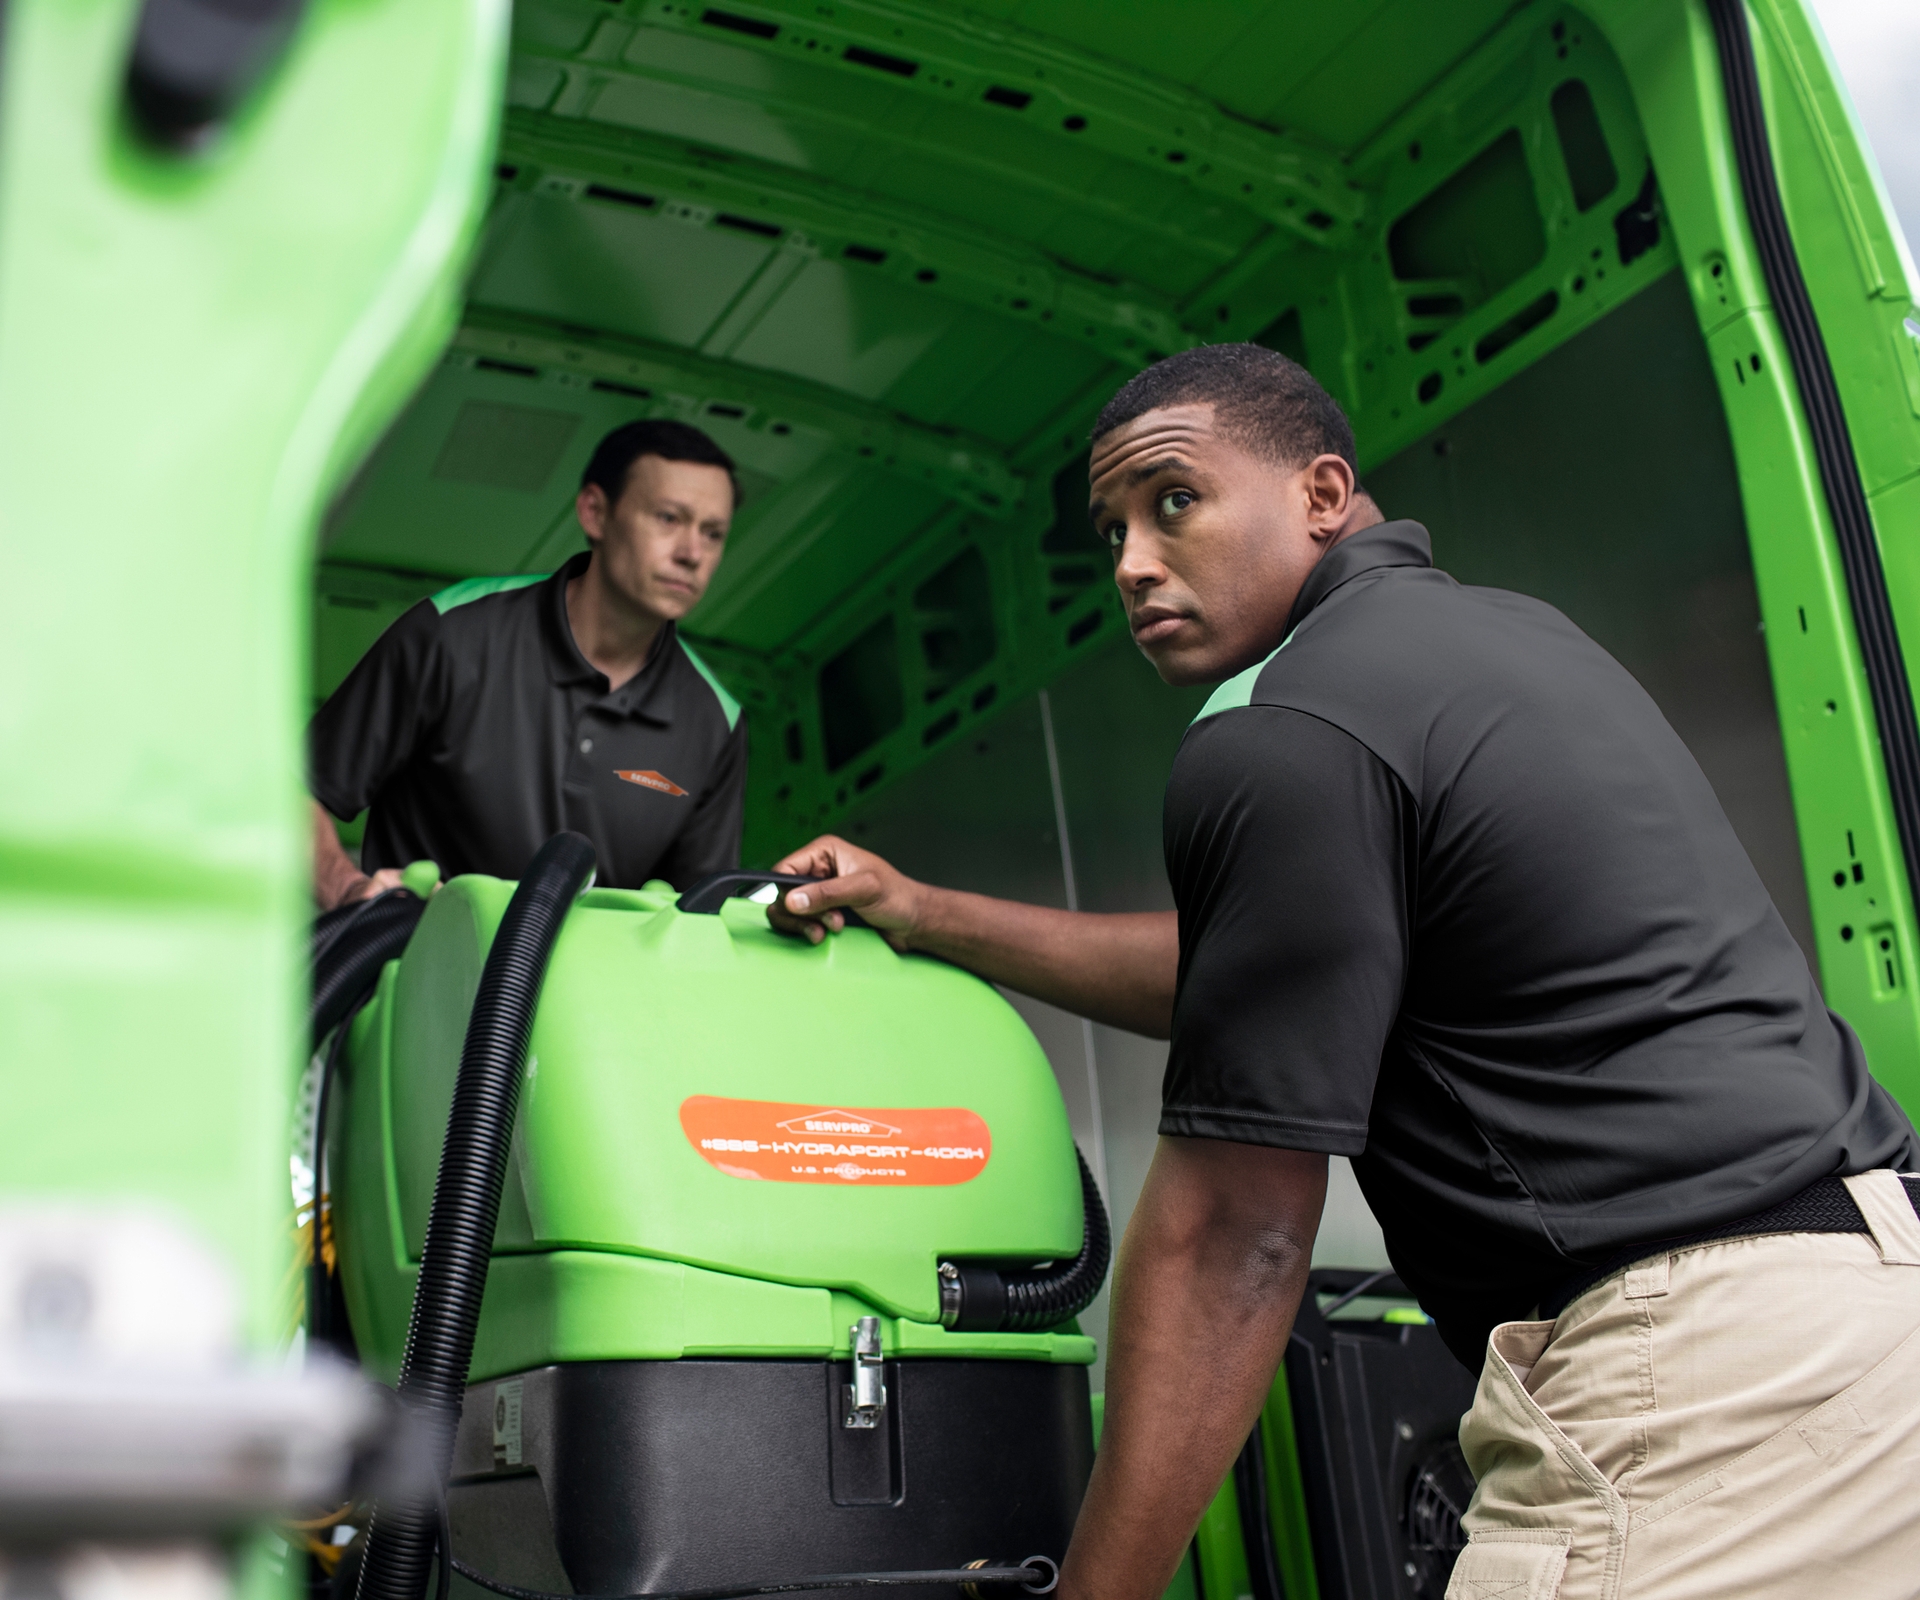 2 SERVPRO employees removing equipment from van